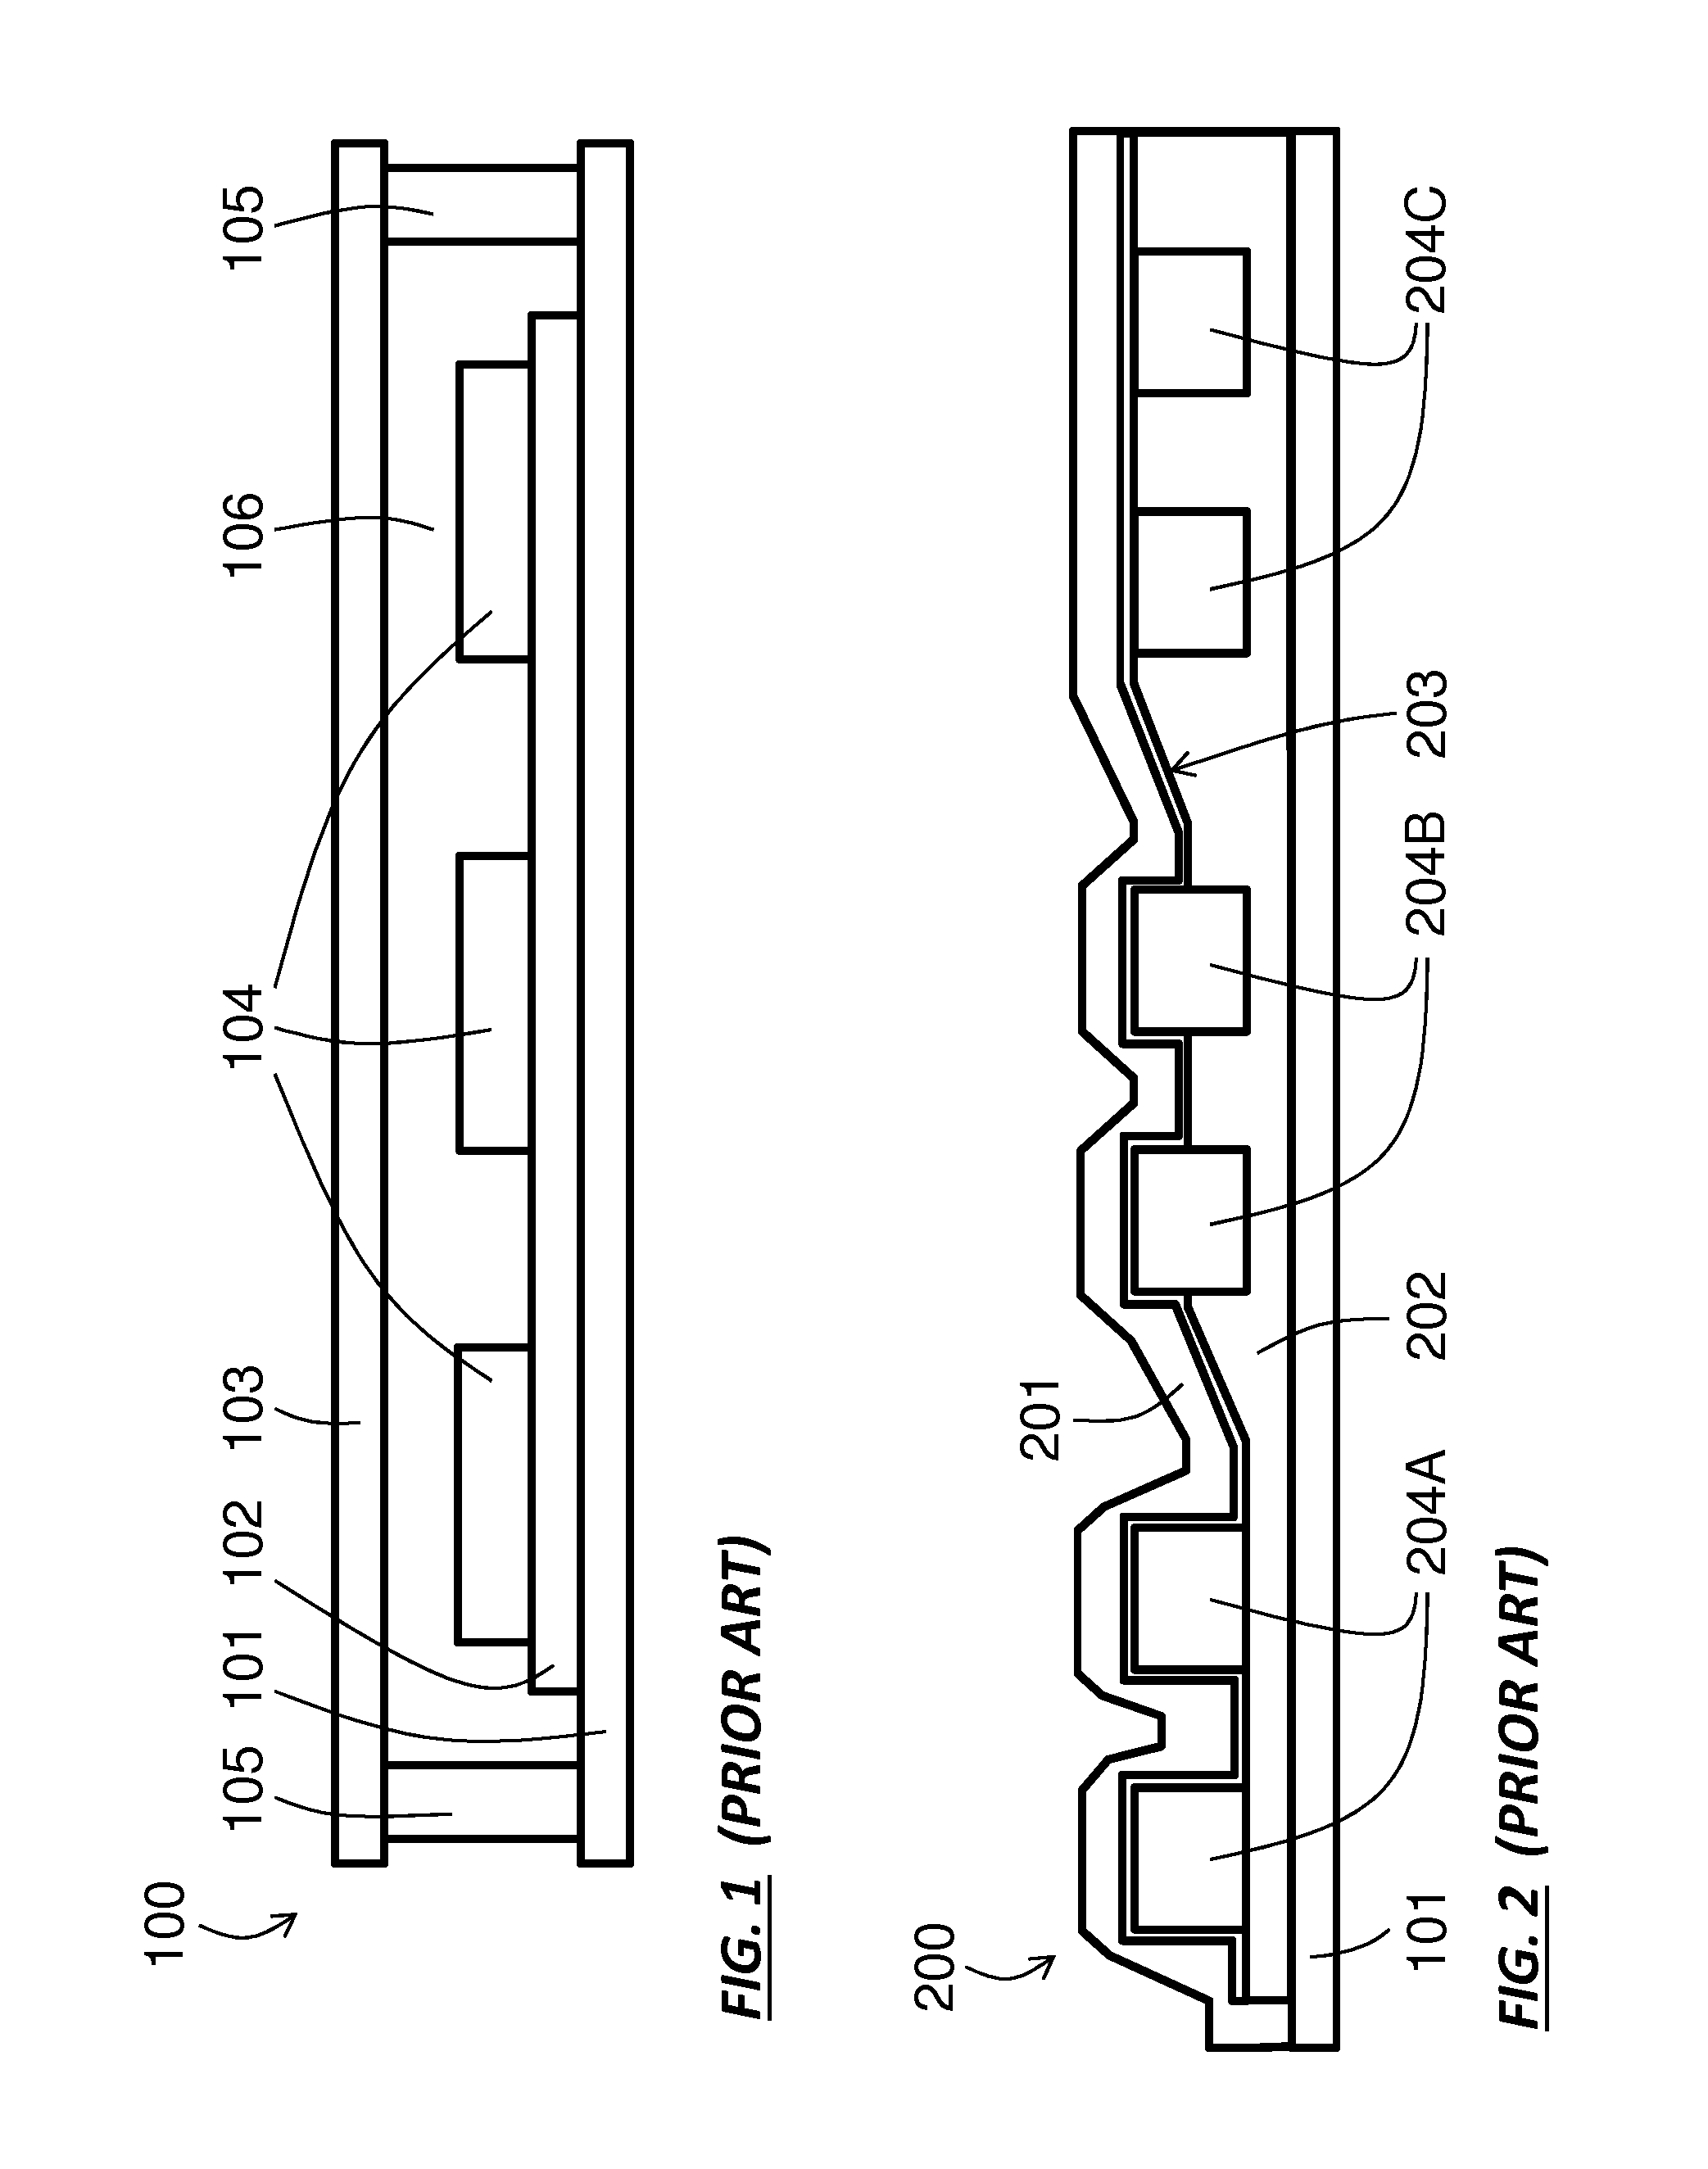 Local seals for encapsulation above and below electro-optical element on a substrate